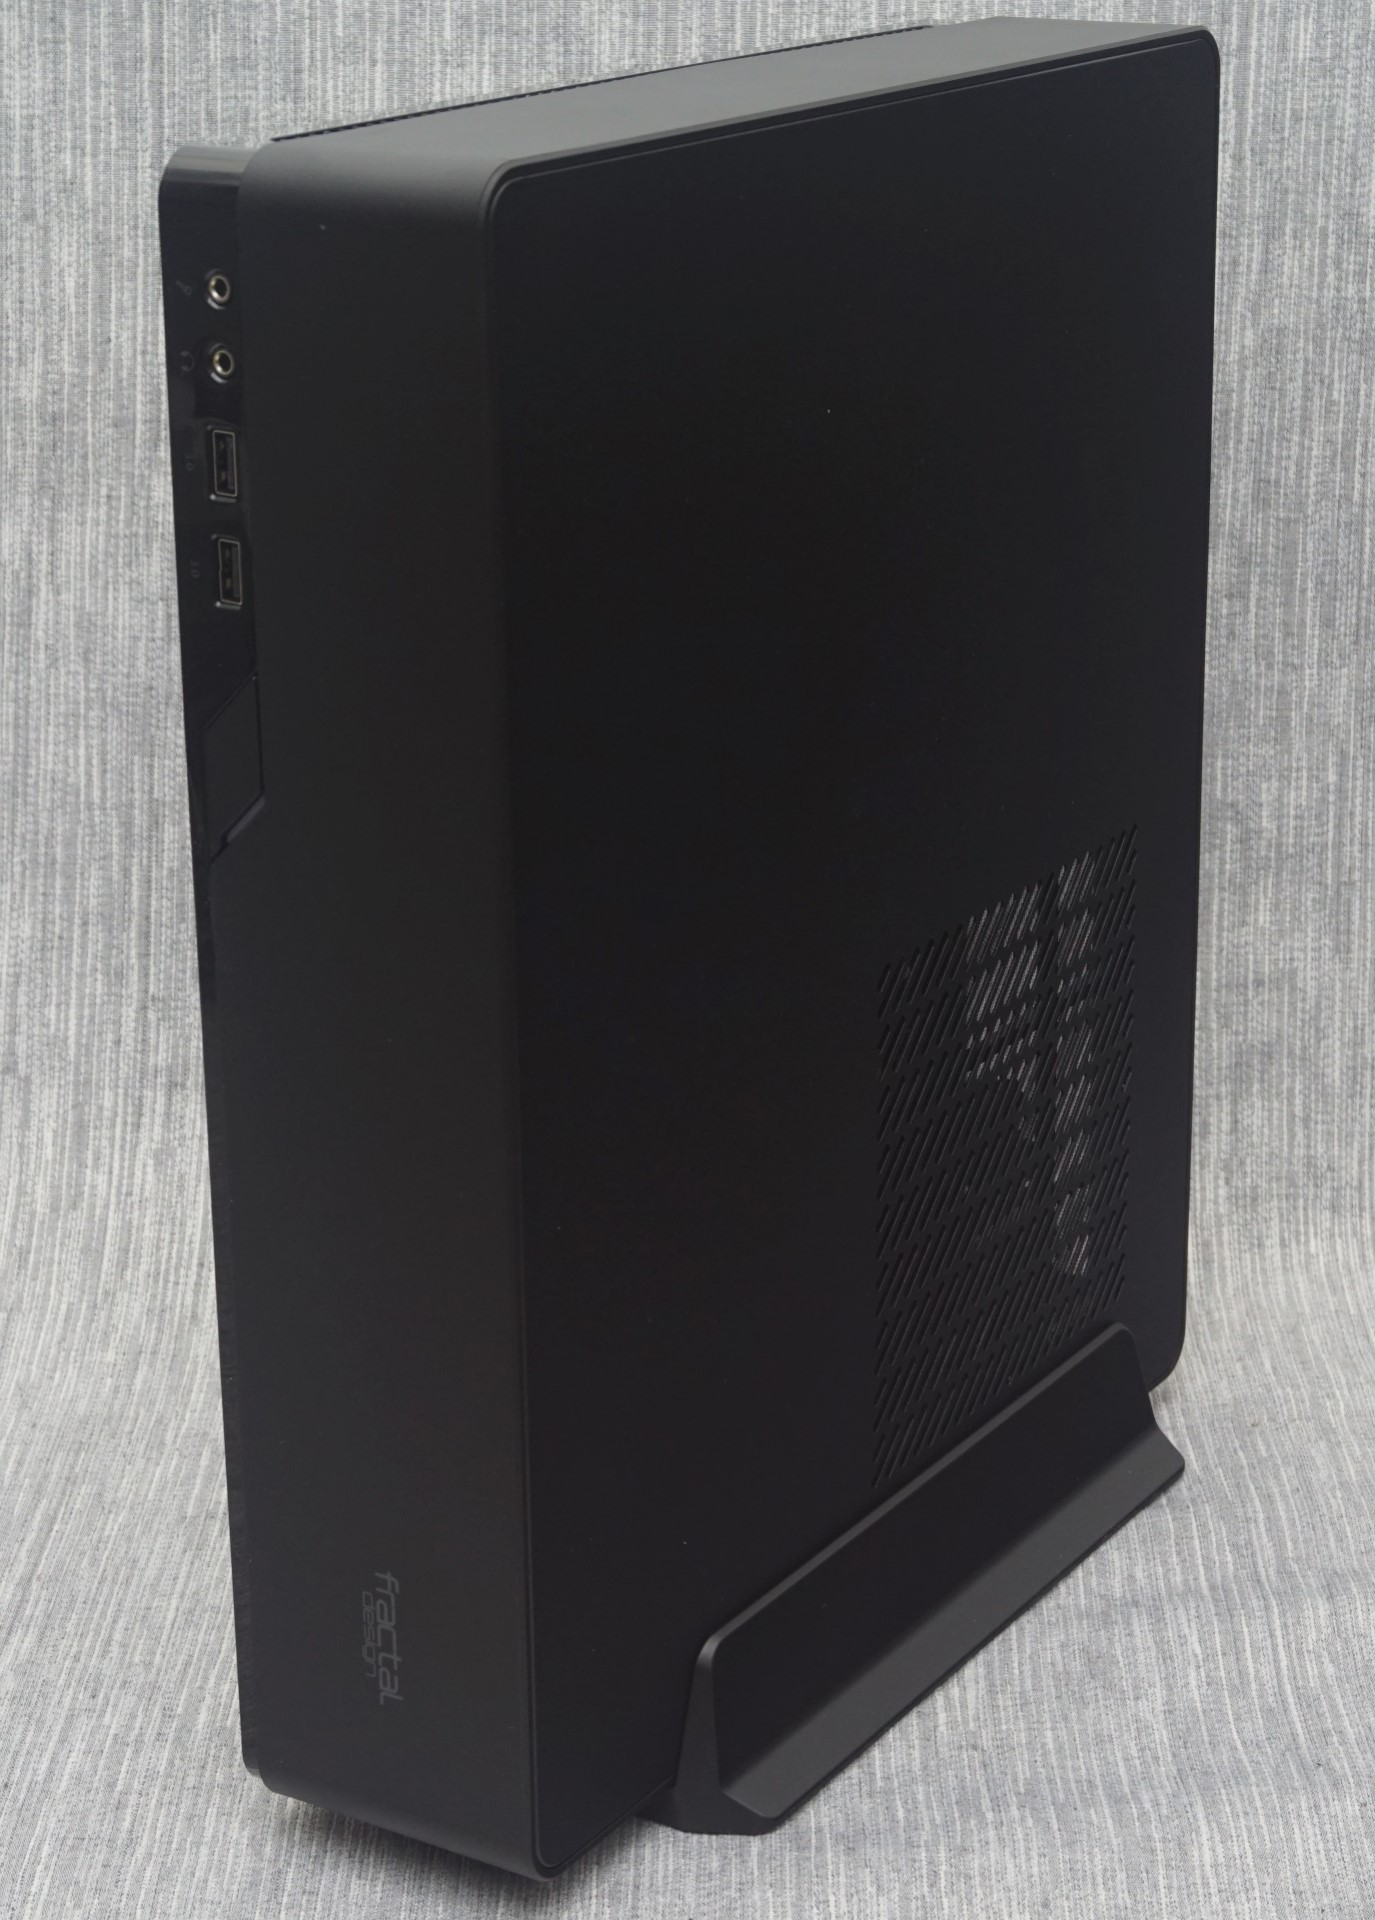 The Exterior of the Fractal Design Node 202 - The Fractal Design Node 202 Case Mini-ITX Gaming For the Room